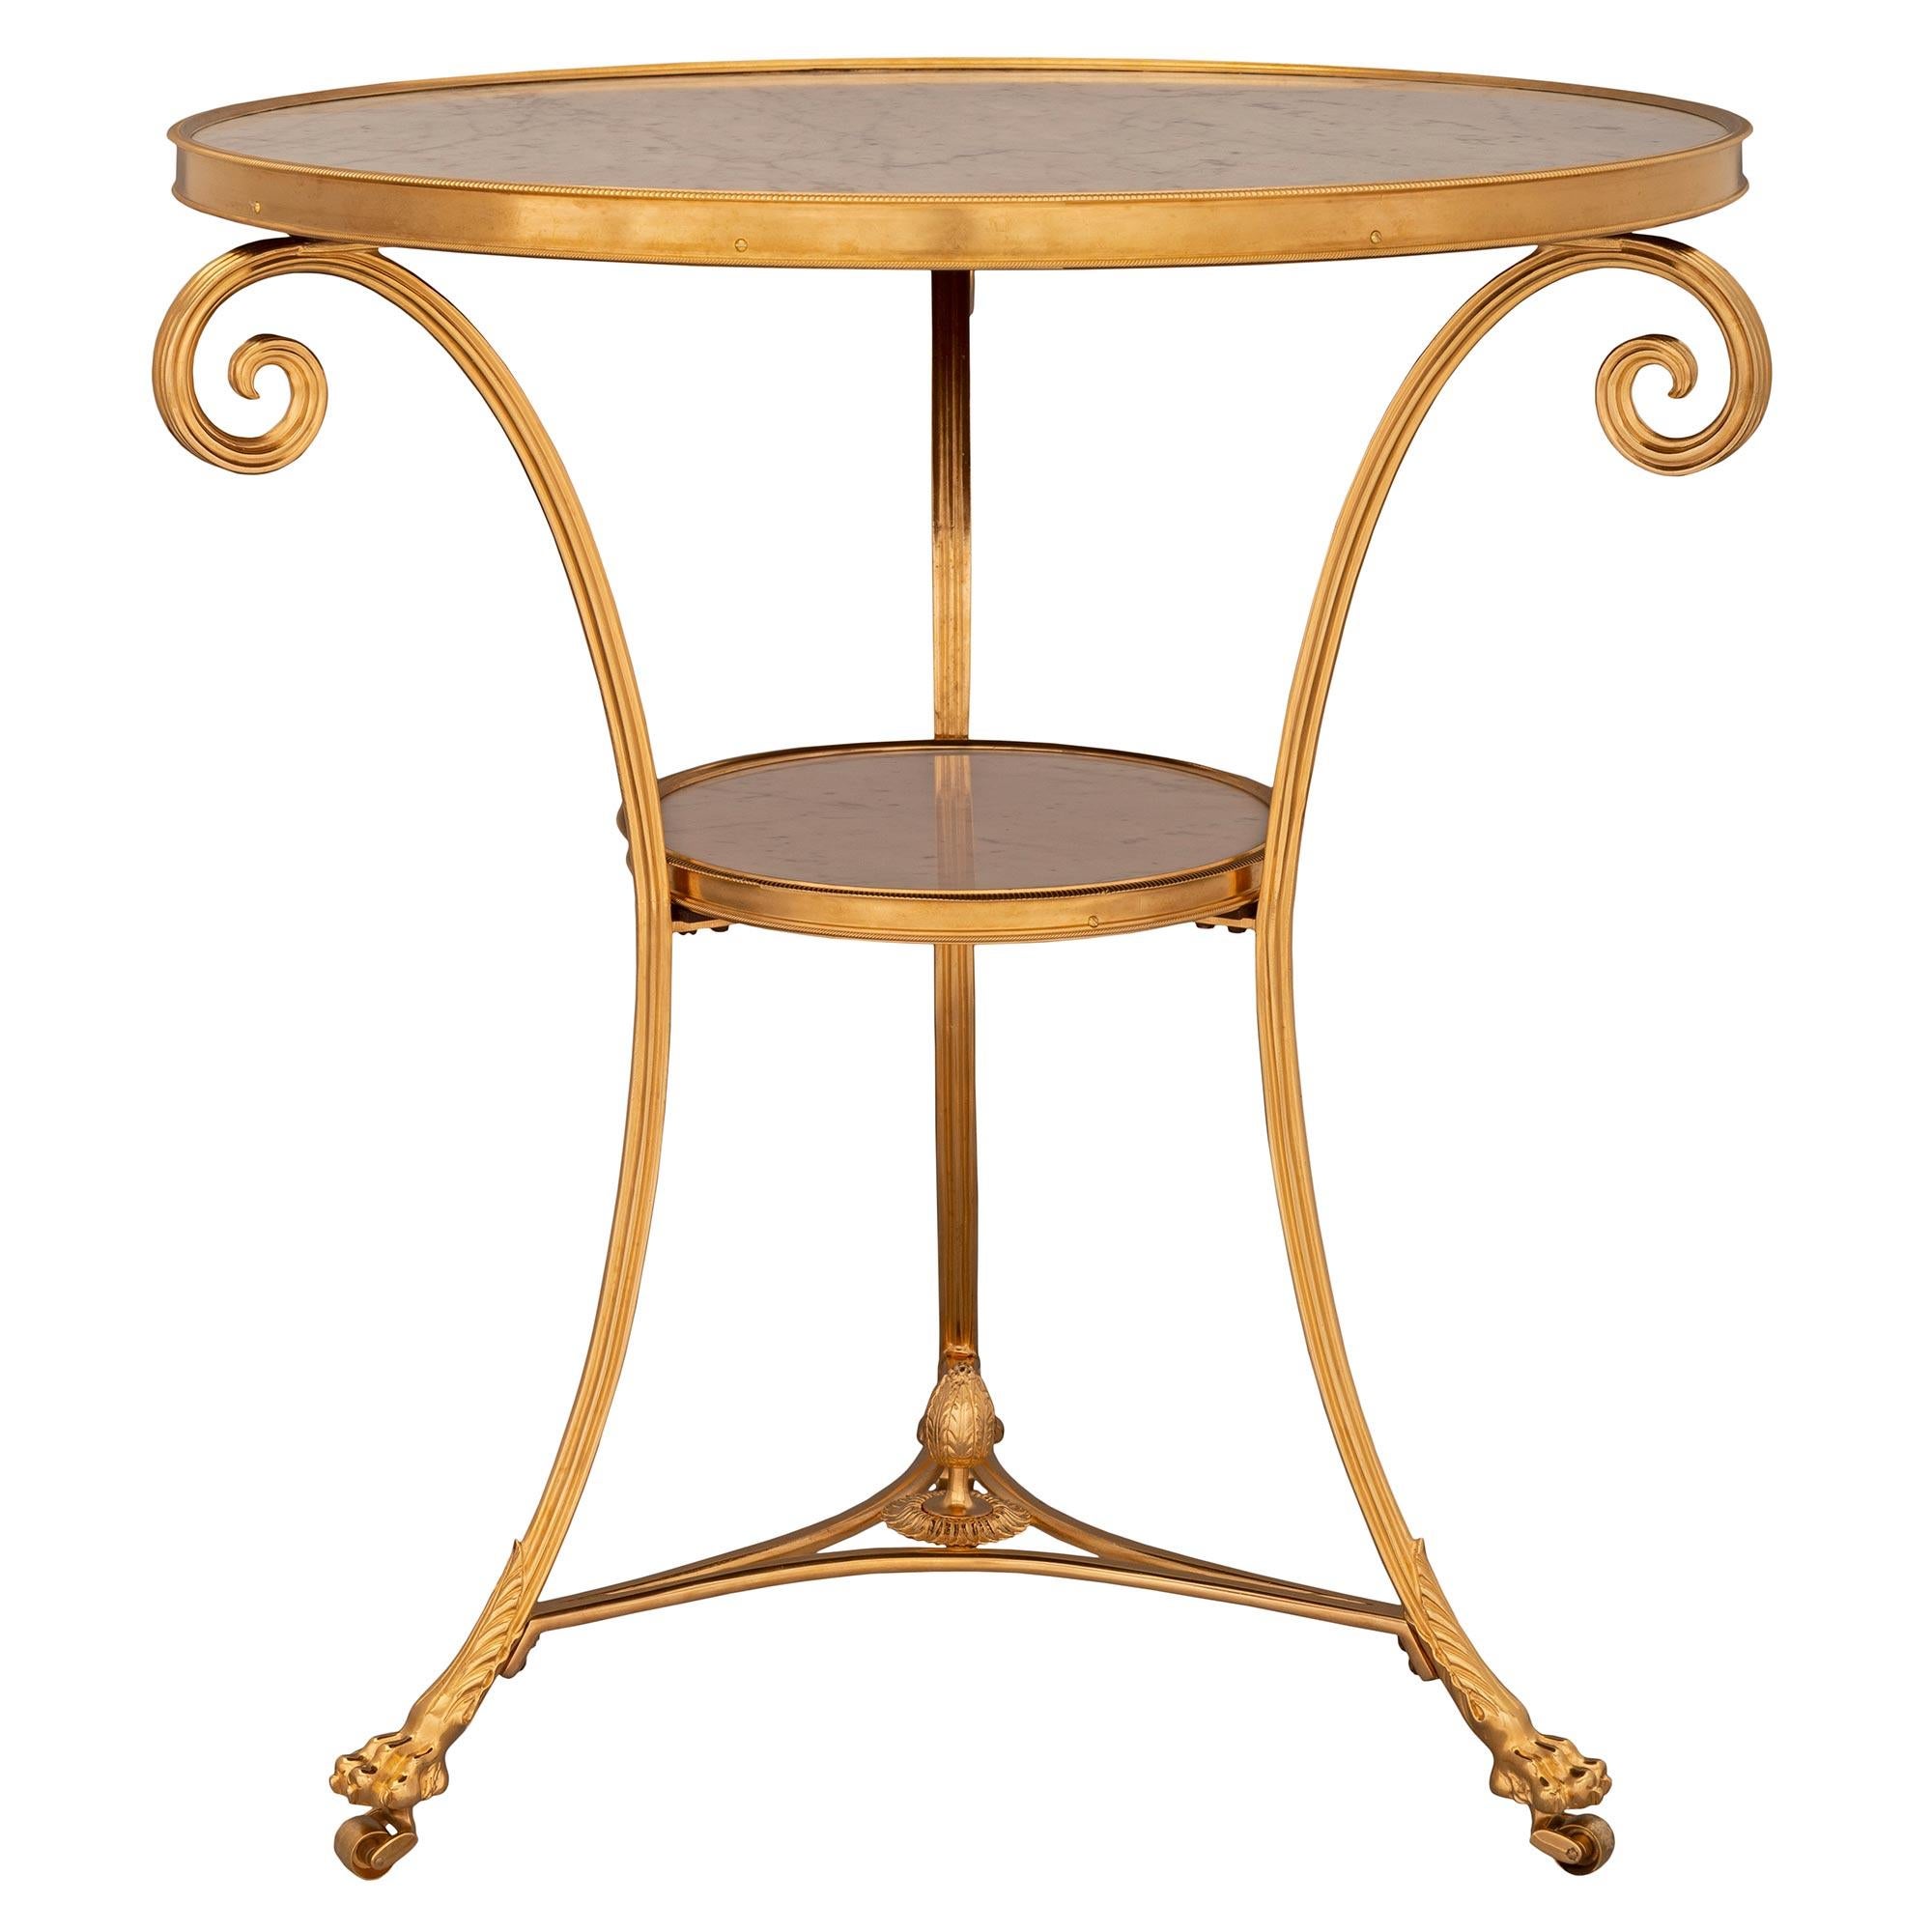 A striking French 19th century Louis XVI st. ormolu and white Carrara marble Gueridon side table. The table is raised by its original casters below handsome paw feet and large richly chased acanthus leaves. Each elegant lightly curved support is